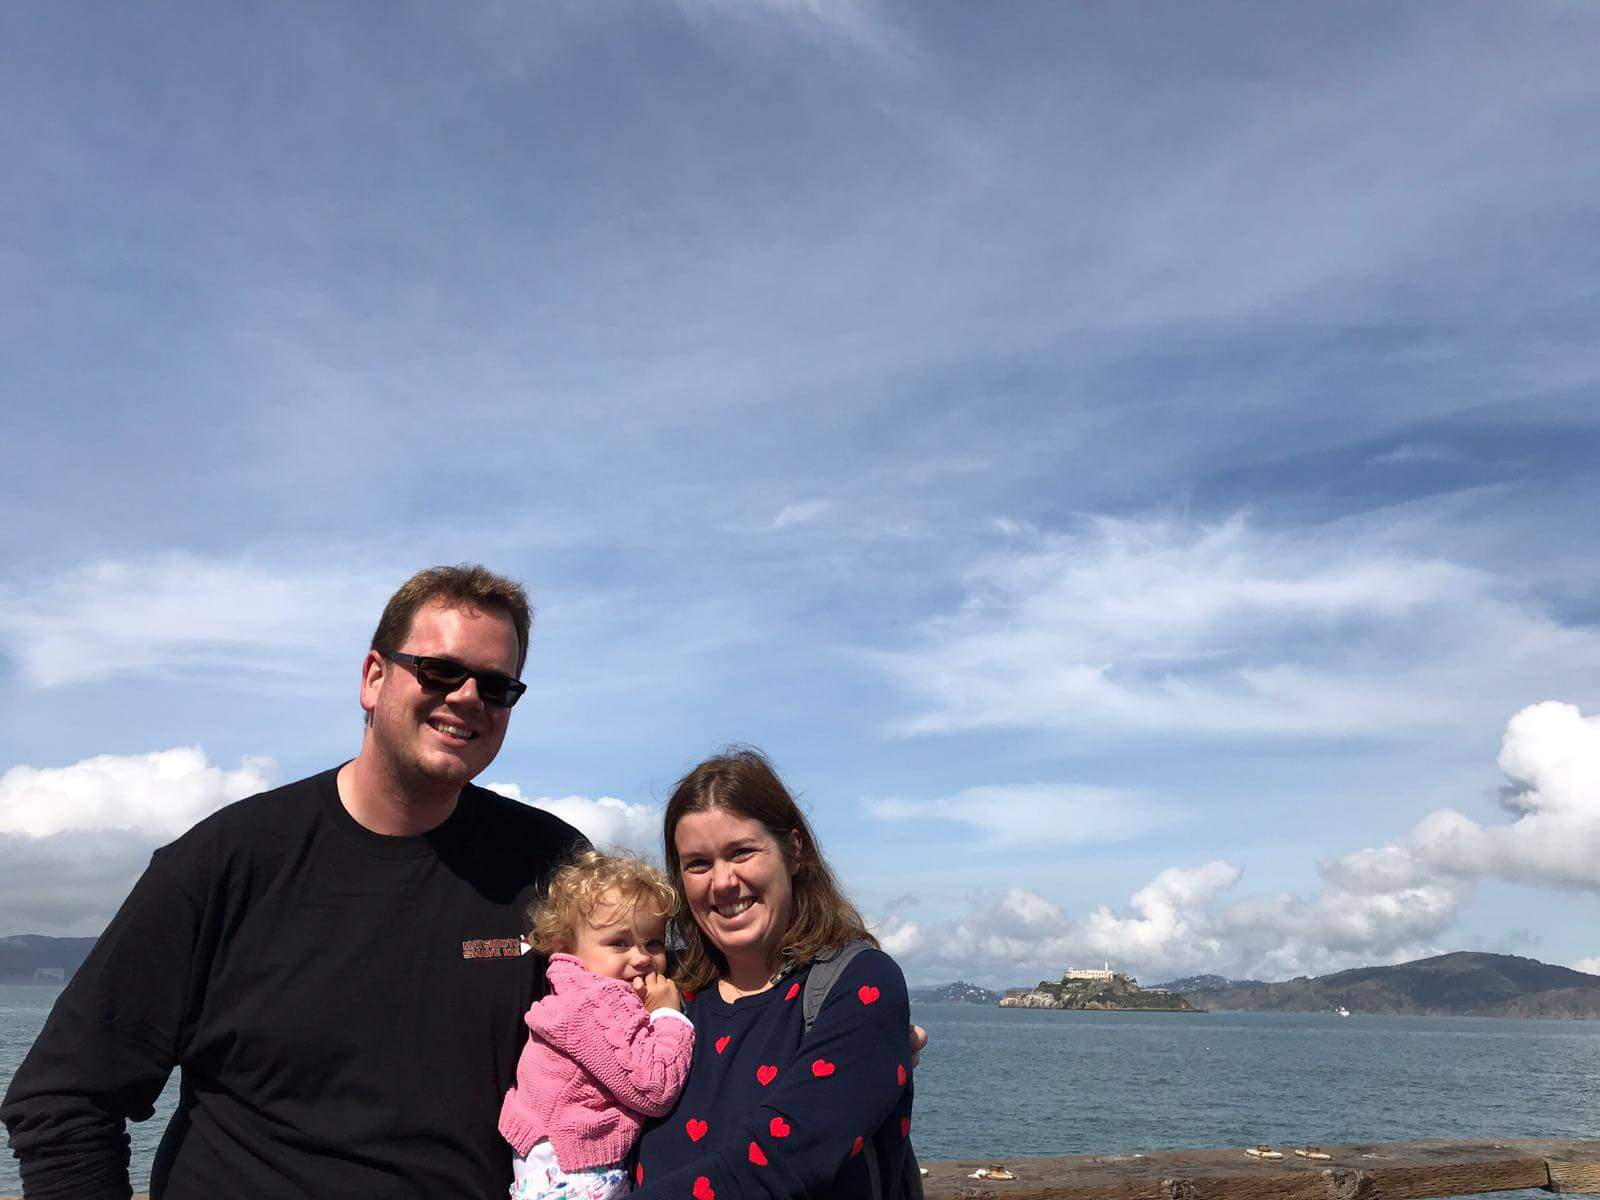 Family with a toddler in San Francisco with Alcatraz in the background